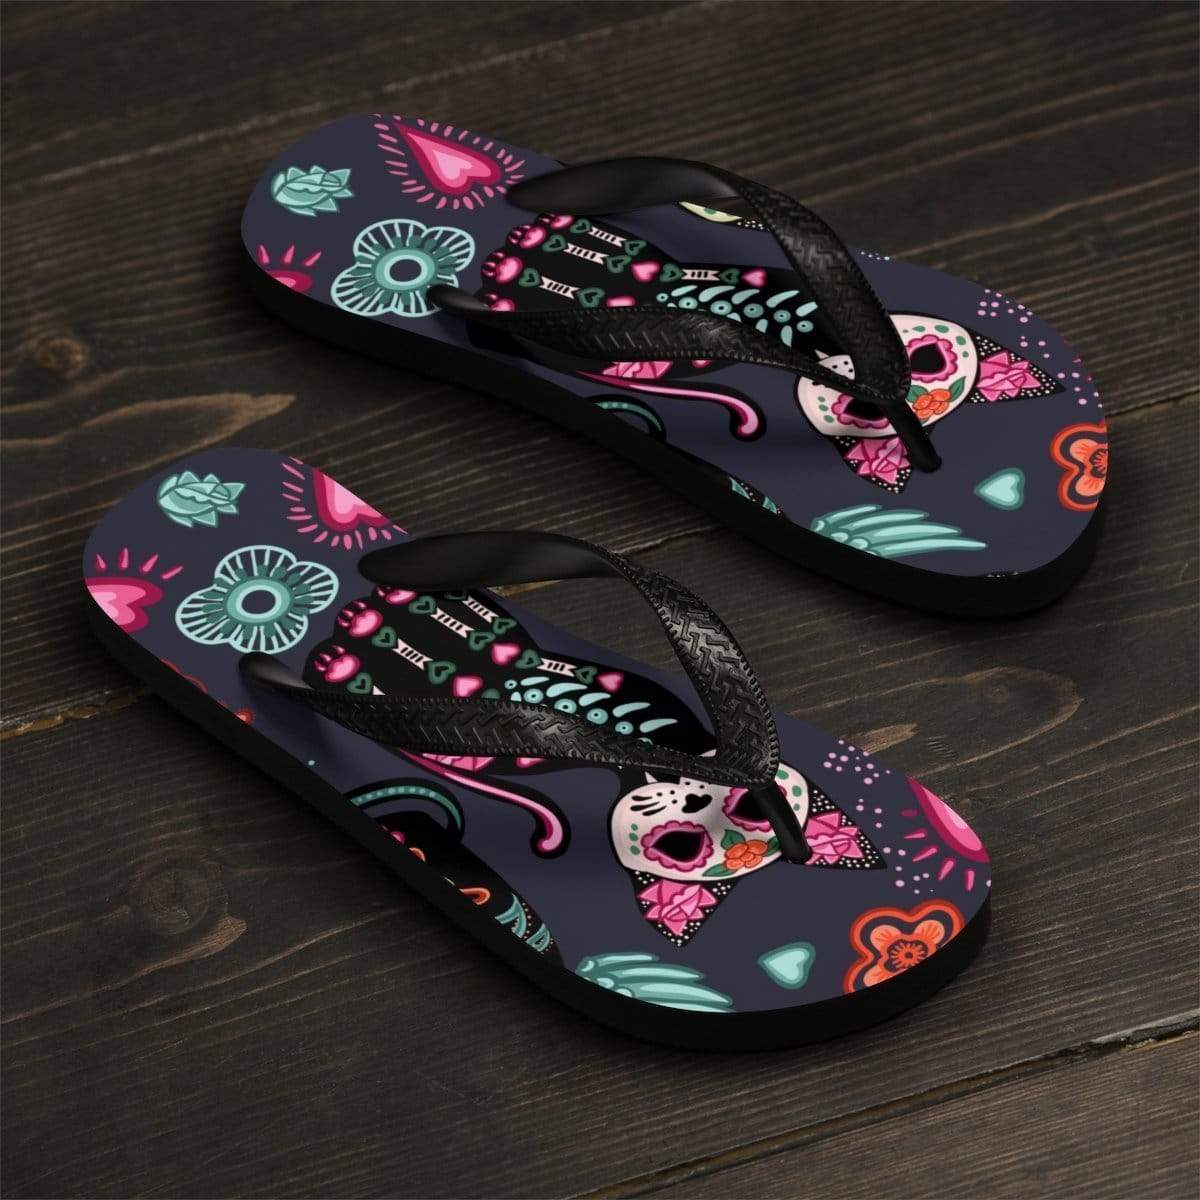 Shoes with Cats for Cat Lovers, Skeleton Cat Flip Flops Featuring Colorful Cats Hearts and Flowers